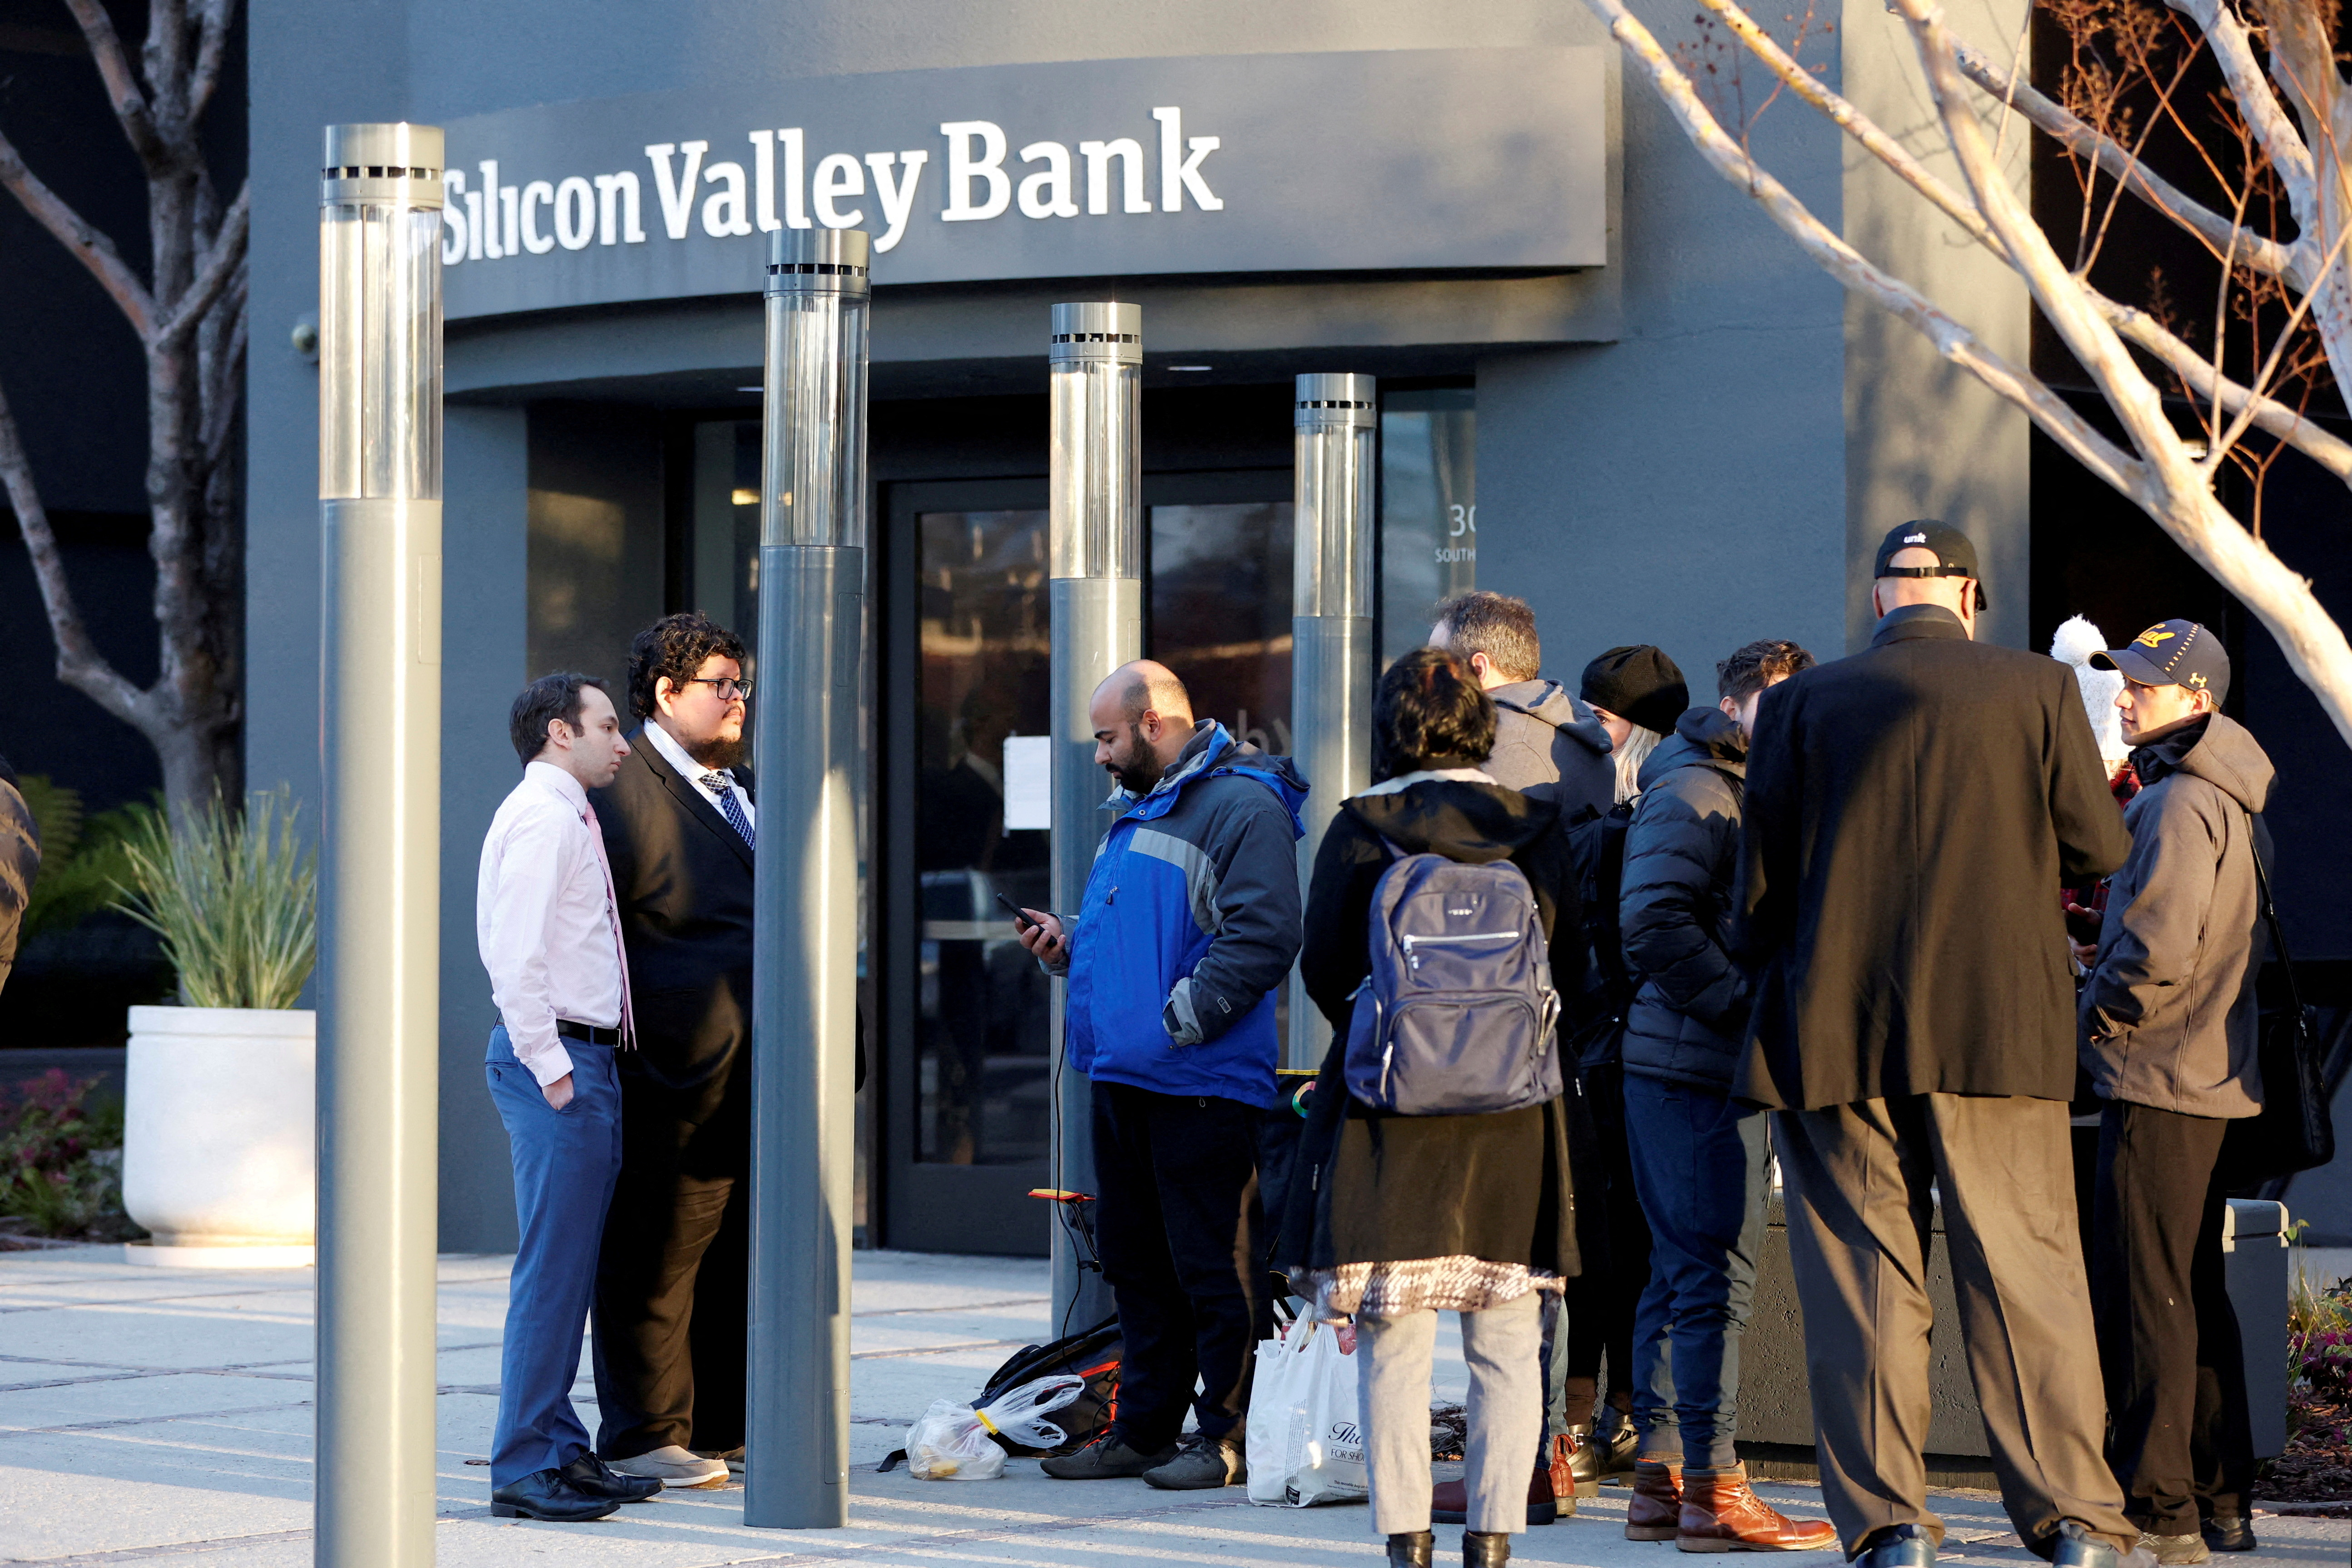 Customers stand outside the Silicon Valley Bank headquarters in Santa Clara